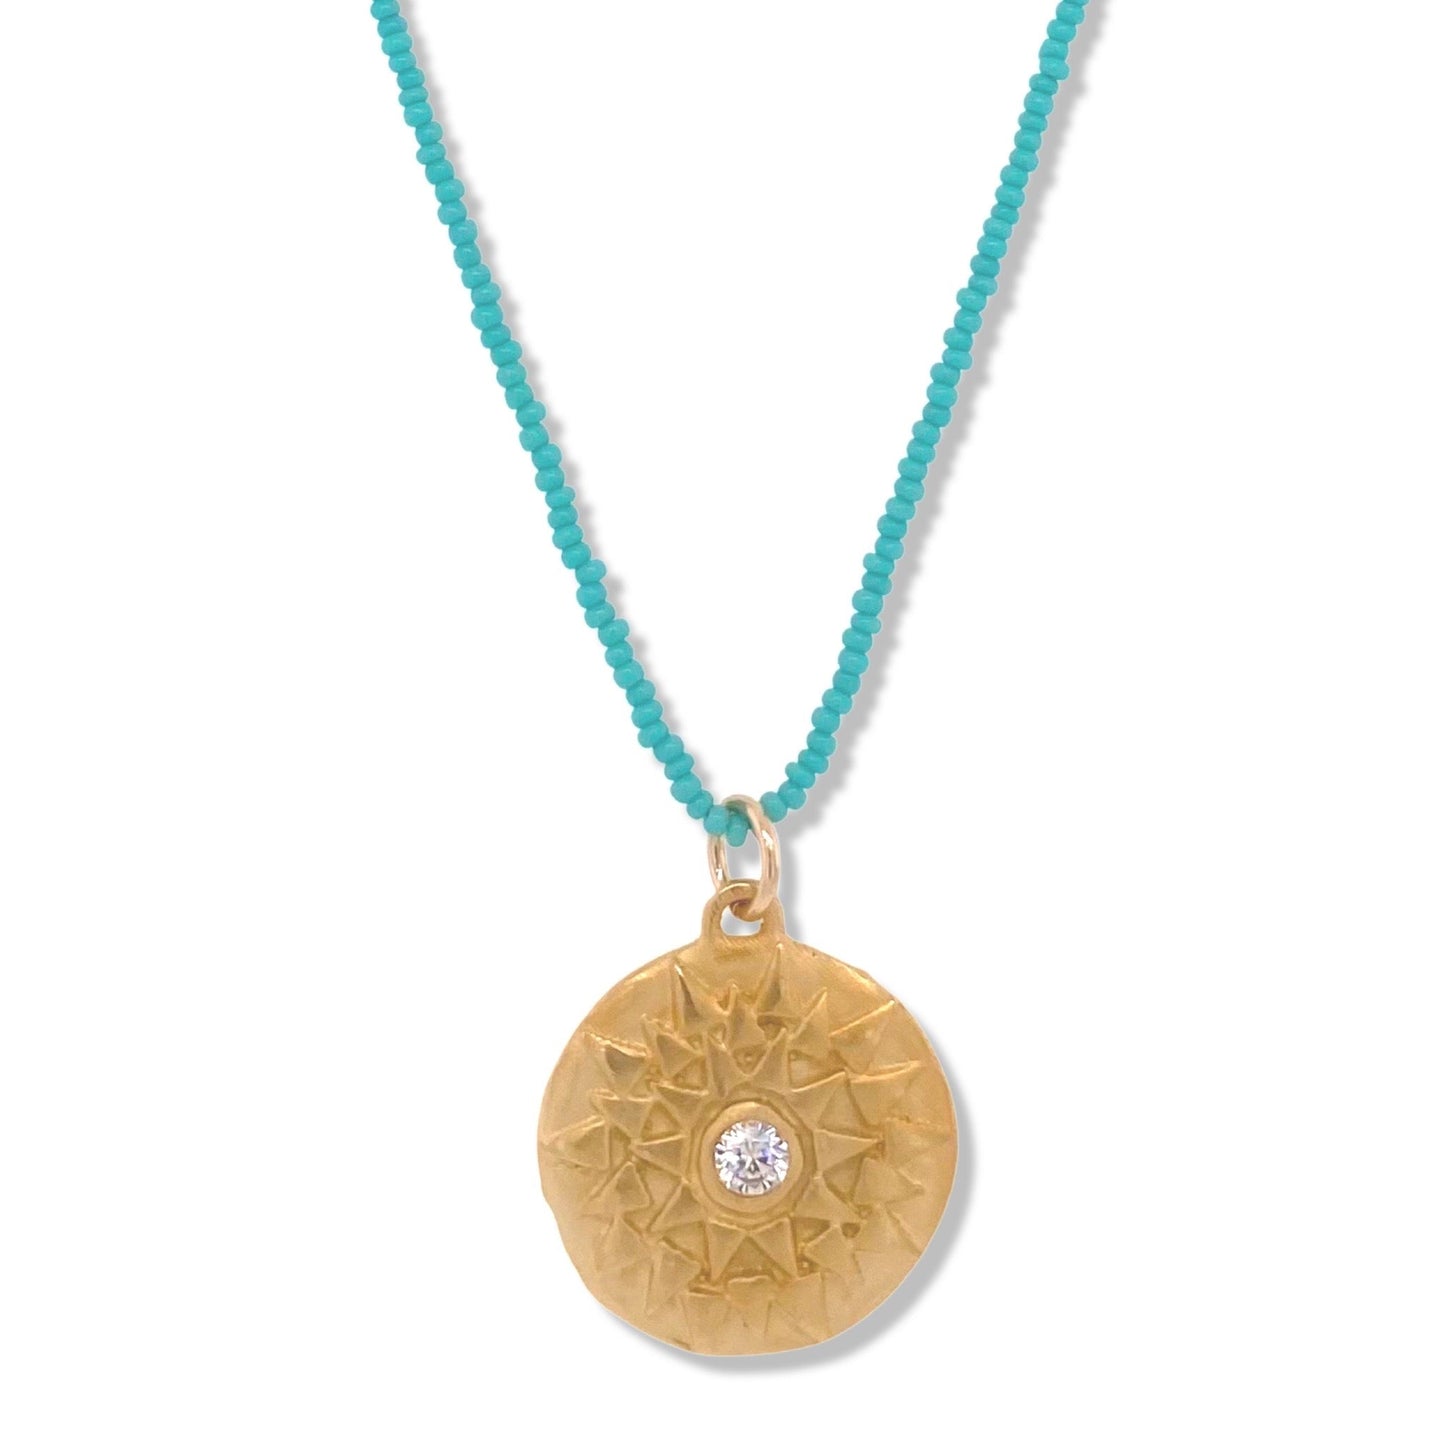 Kha Necklace in Gold on Tiny Turquoise Beads | Nalu | Nantucket